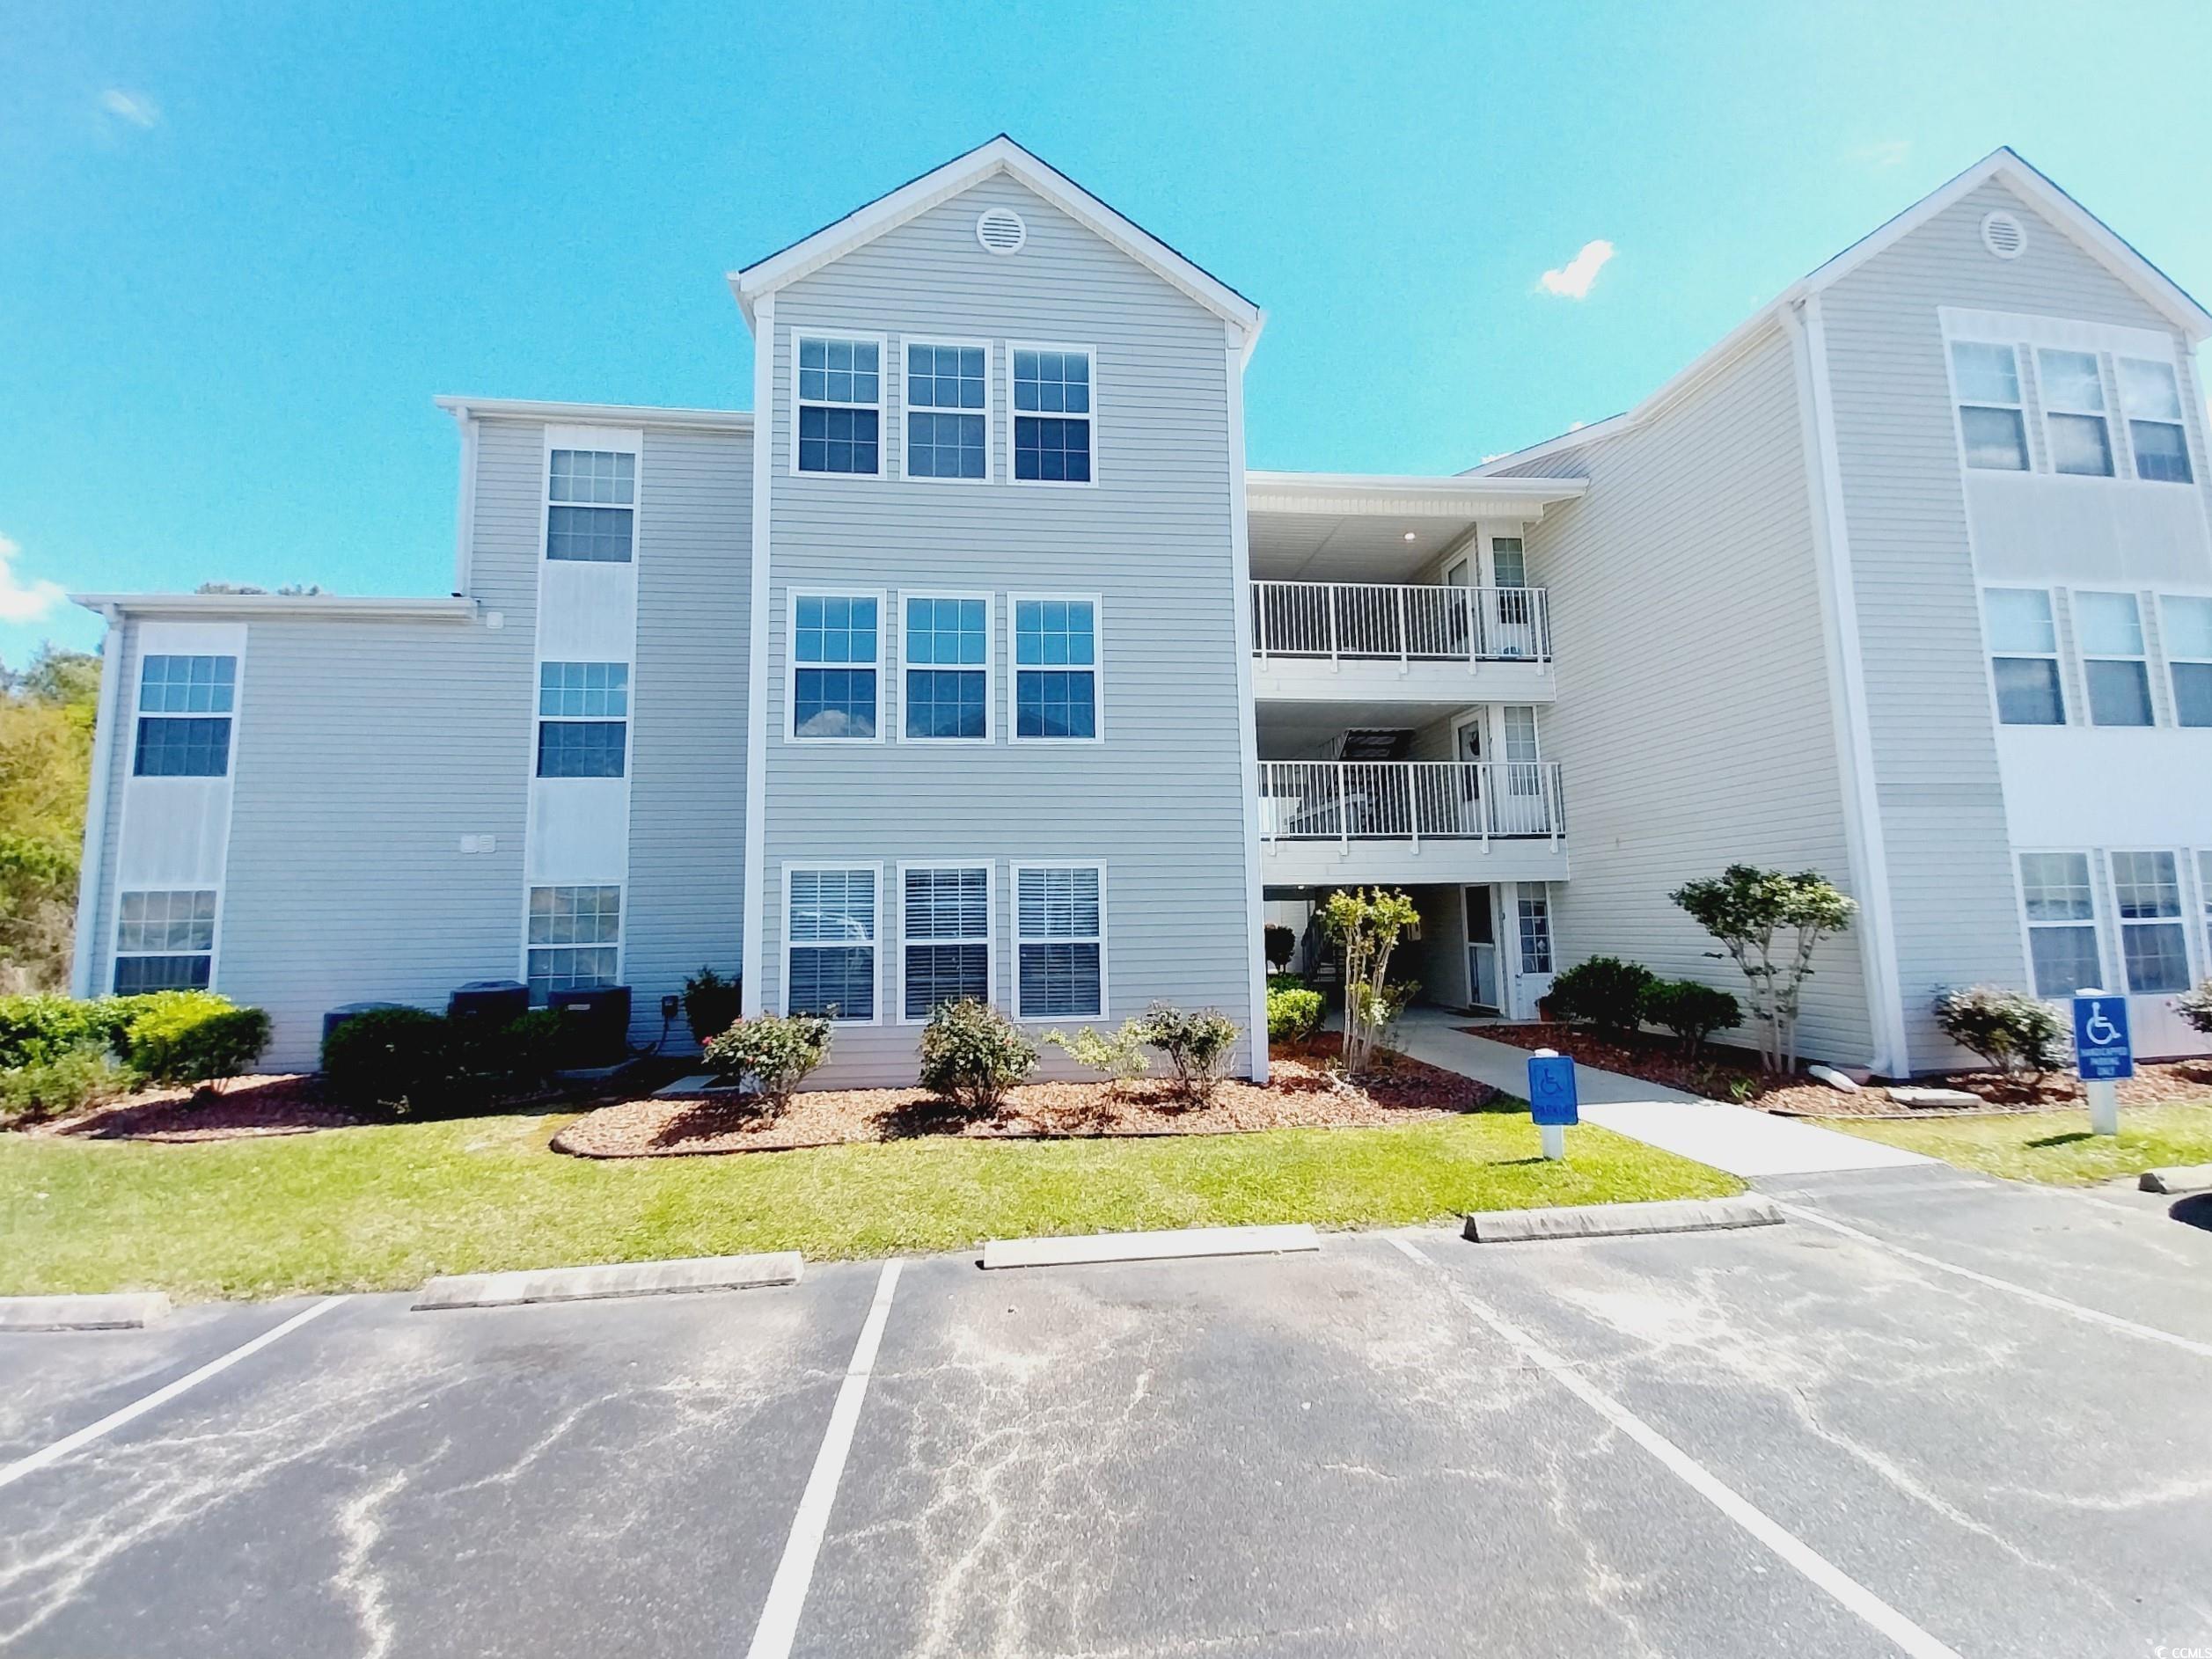 here is a great opportunity to own a 1st floor condo that is barely a 10 minute drive to the beautiful beach in surfside!  this 2 bedroom, 2 bath unit is in the desirable southbidge community and close to all the wonderful dining, shopping and recreation activities that myrtle beach and the grand strand offer.  plenty of natural light will be enjoyed, and the carolina room is a great place to relax and enjoy the beautiful weather that we experience throughout the year.  the hoa fee covers many amenities to make this home even more affordable; which includes the exterior insurance, water and sewer, trash, cable and internet, the nice pool to enjoy that is only steps away and more.  the building is next to a large pond, which offers another setting to relax and enjoy during your days.  to help the new owner make this home their own, with an agreed upon offer the seller is also providing a credit at closing to go towards any flooring or painting upgrades that are wanted.  call today to schedule your showing for this condo, you'll soon be living 10 minutes from the beach!!